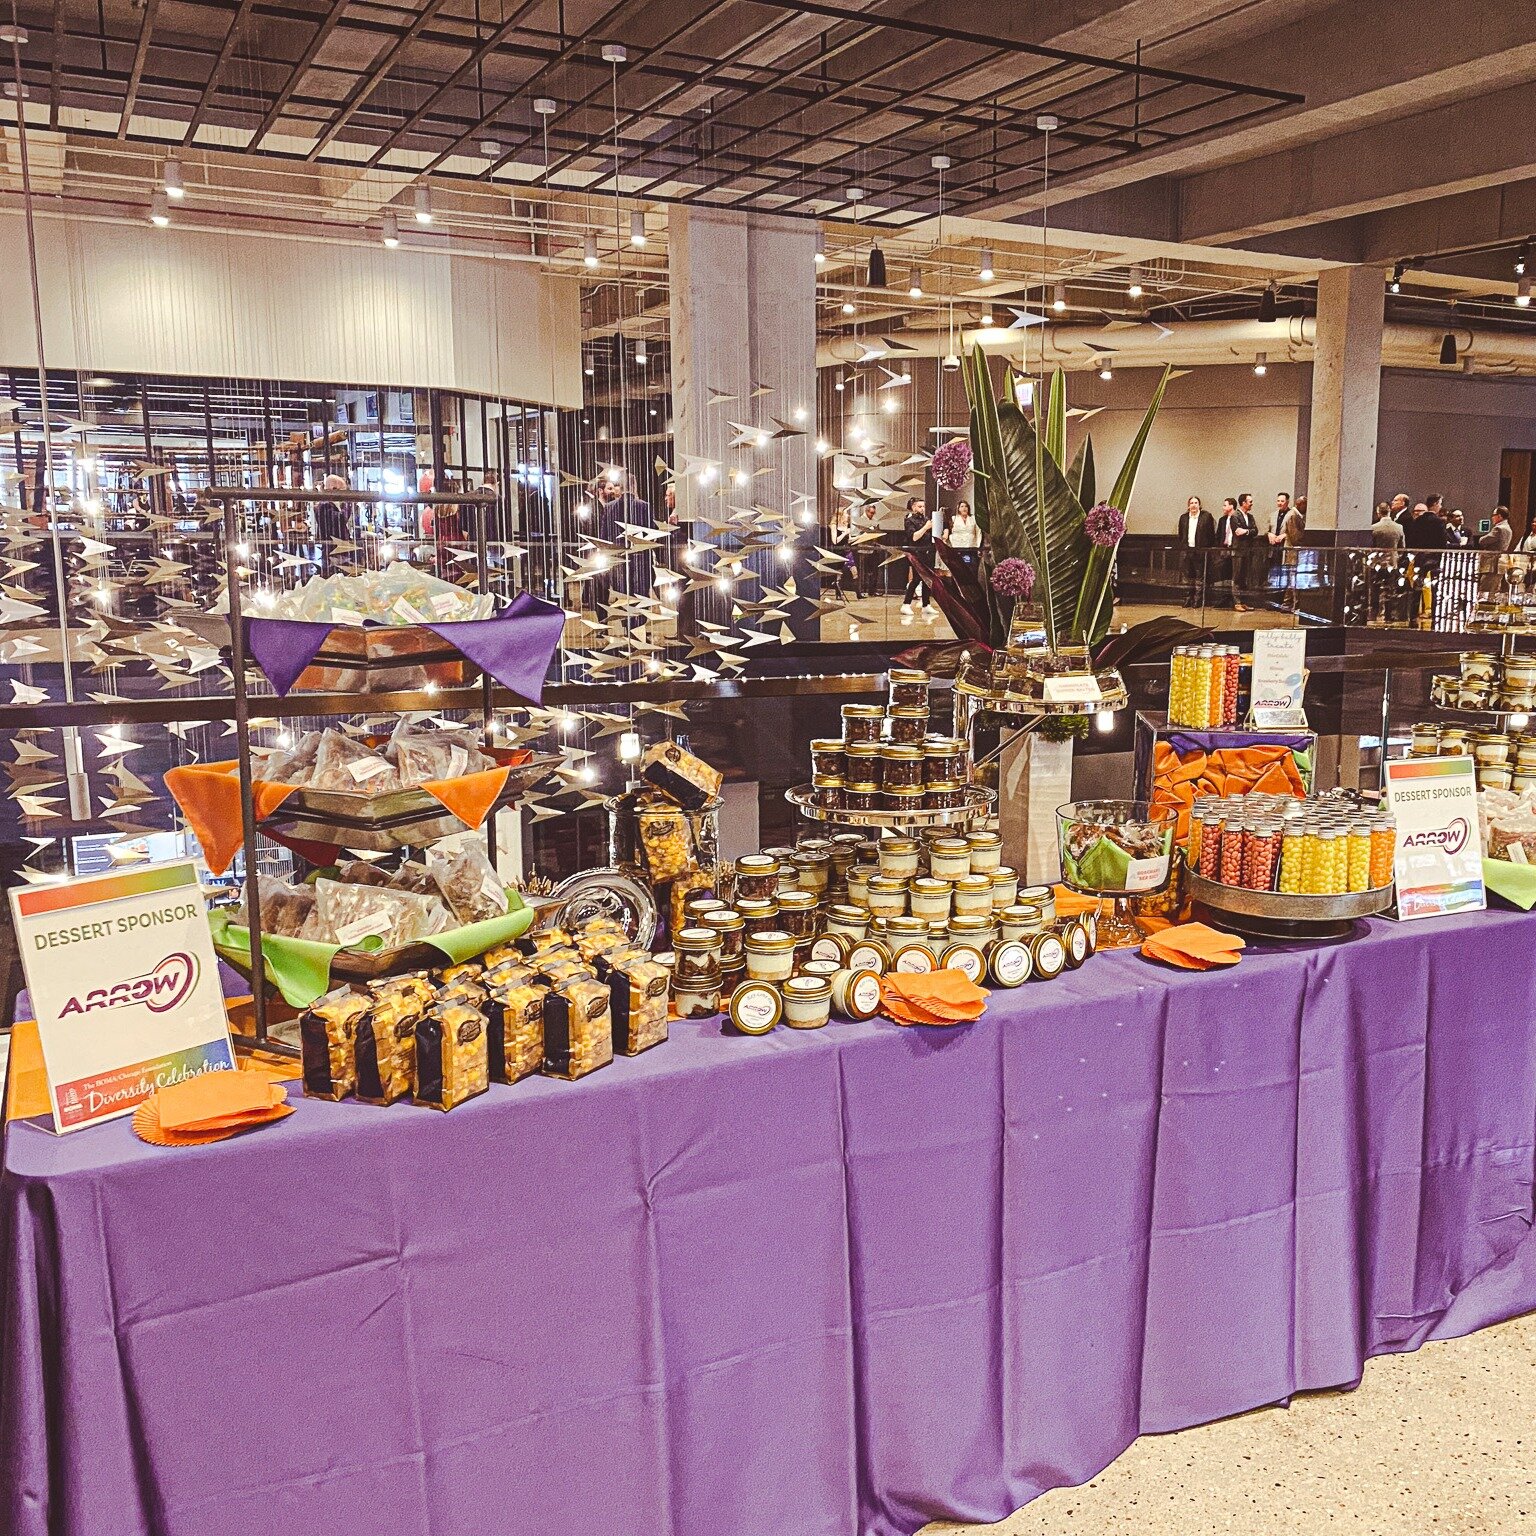 We had the pleasure of catering for BOMA (@bomachicago)'s 11th Annual Diversity Celebration. This event was all around amazing with wonderful people and, of course, delicious food. Check out this dessert table featuring some of our favorite sweets an